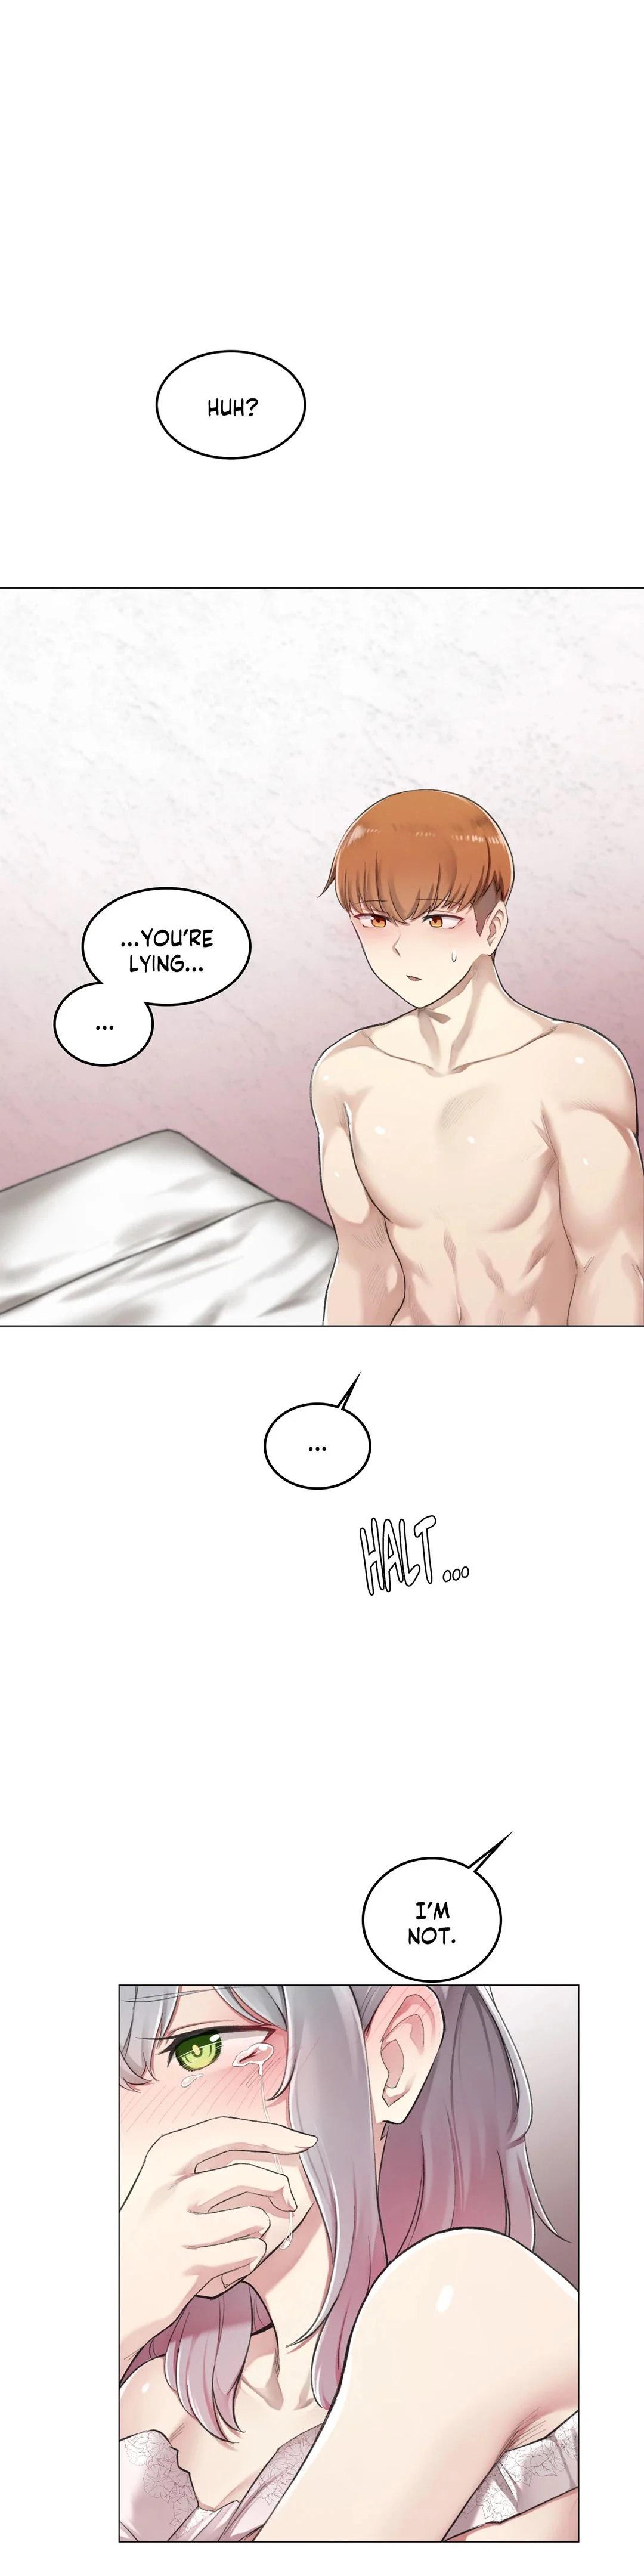 [Dumangoon, KONG_] Sexcape Room: Snap Off Ch.7/7 [English] [Manhwa PDF] Completed 140